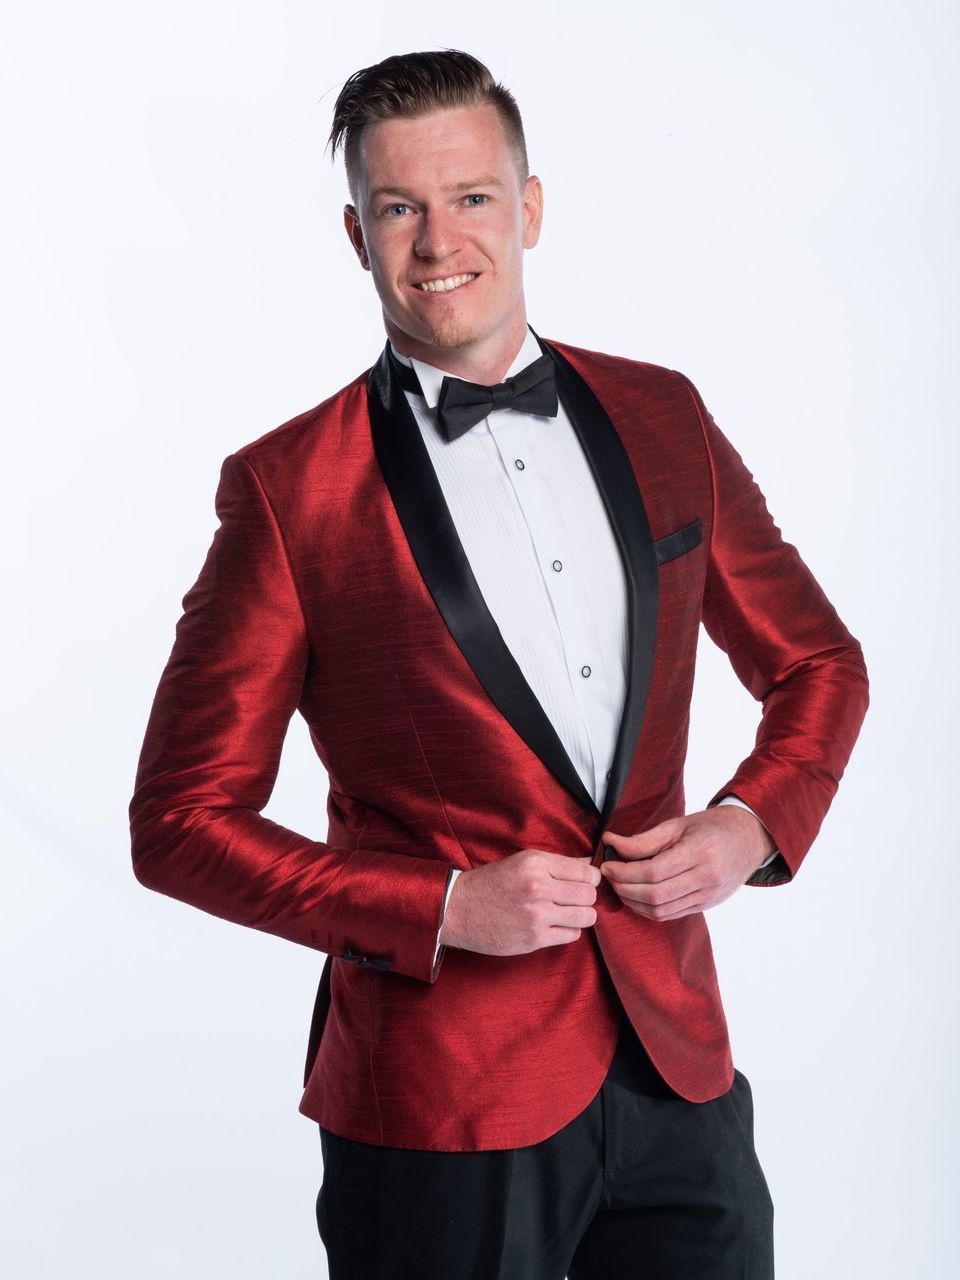 Season Debut of The Bachelorette South Africa Lights Up M-Net 101